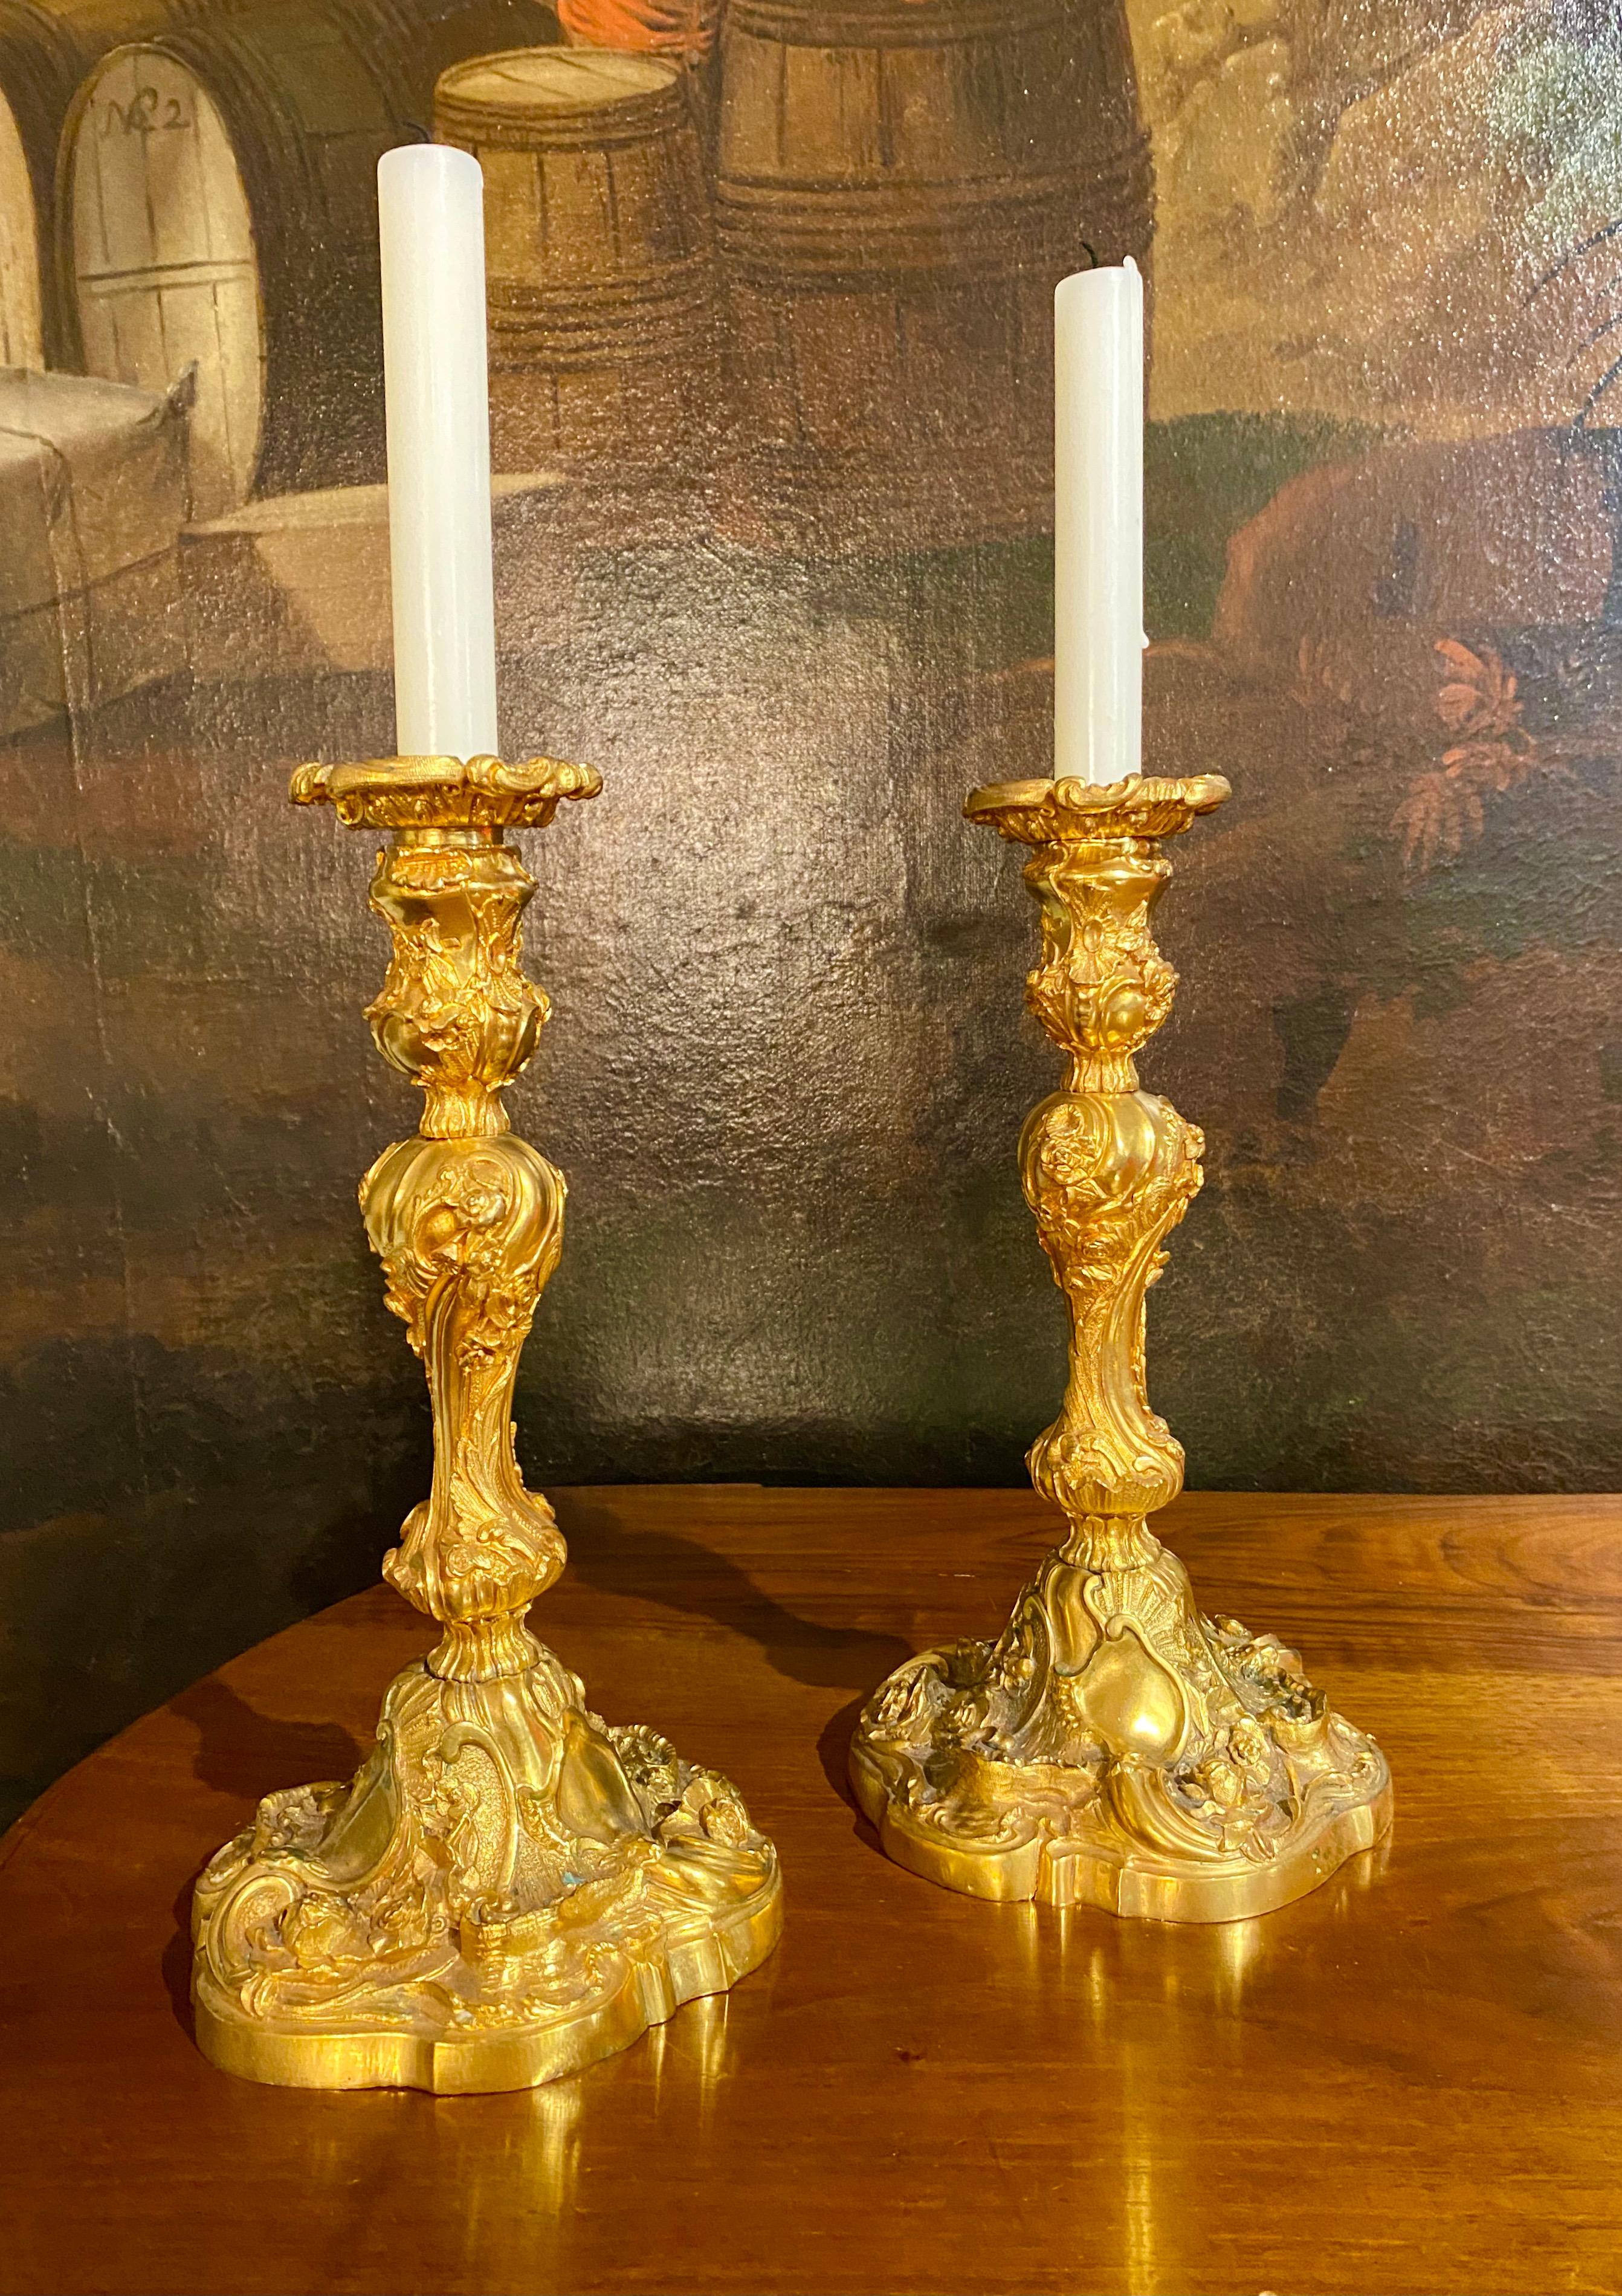 Pair of finely chased ormolu Louis XV style gilt bronze candlesticks. Intricate bases are decorated with flowers, garlands, scrolls and shells. Rocaille and gadroons swirl around the stem in the Baroque, Rococo style, and adorn the detachable nozzle